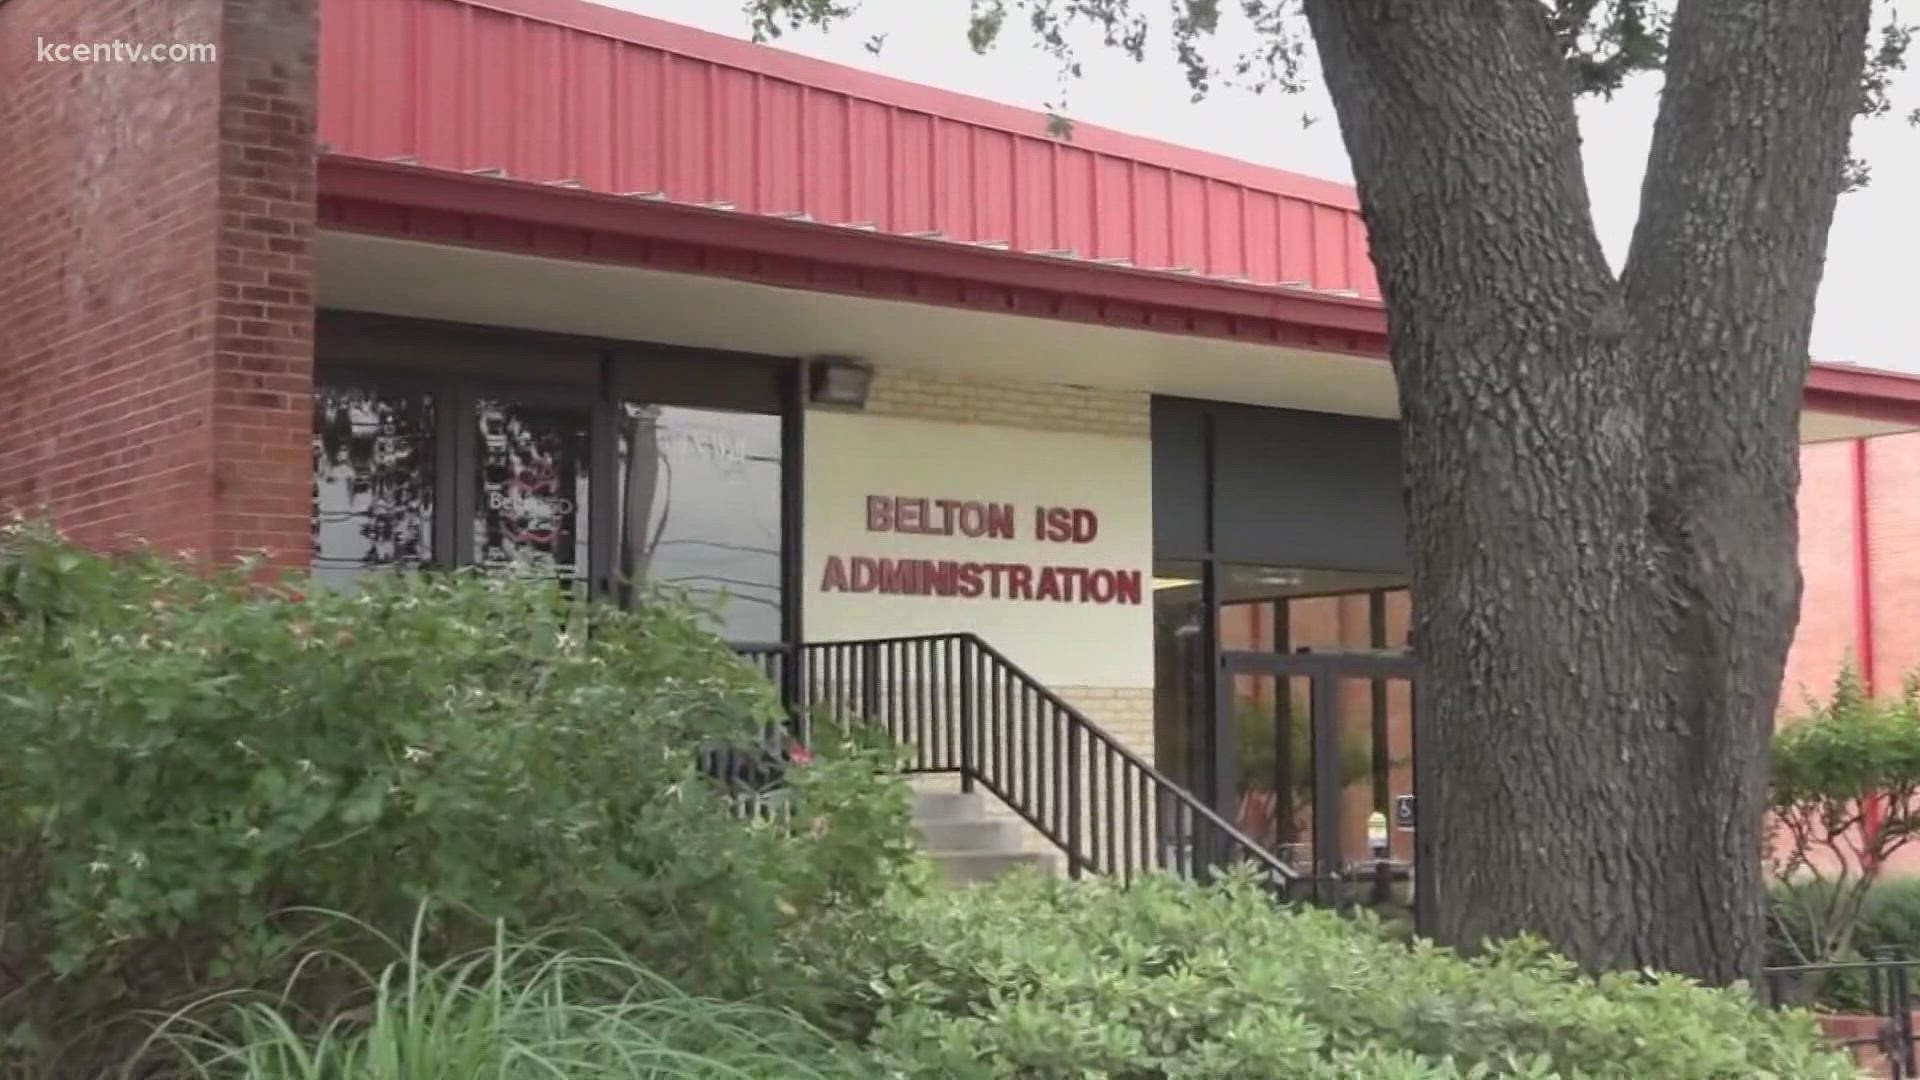 The Bell County Republican Executive Committee passed a resolution opposing Belton ISD's bond in March.  They're still standing by it 2 weeks before the election.